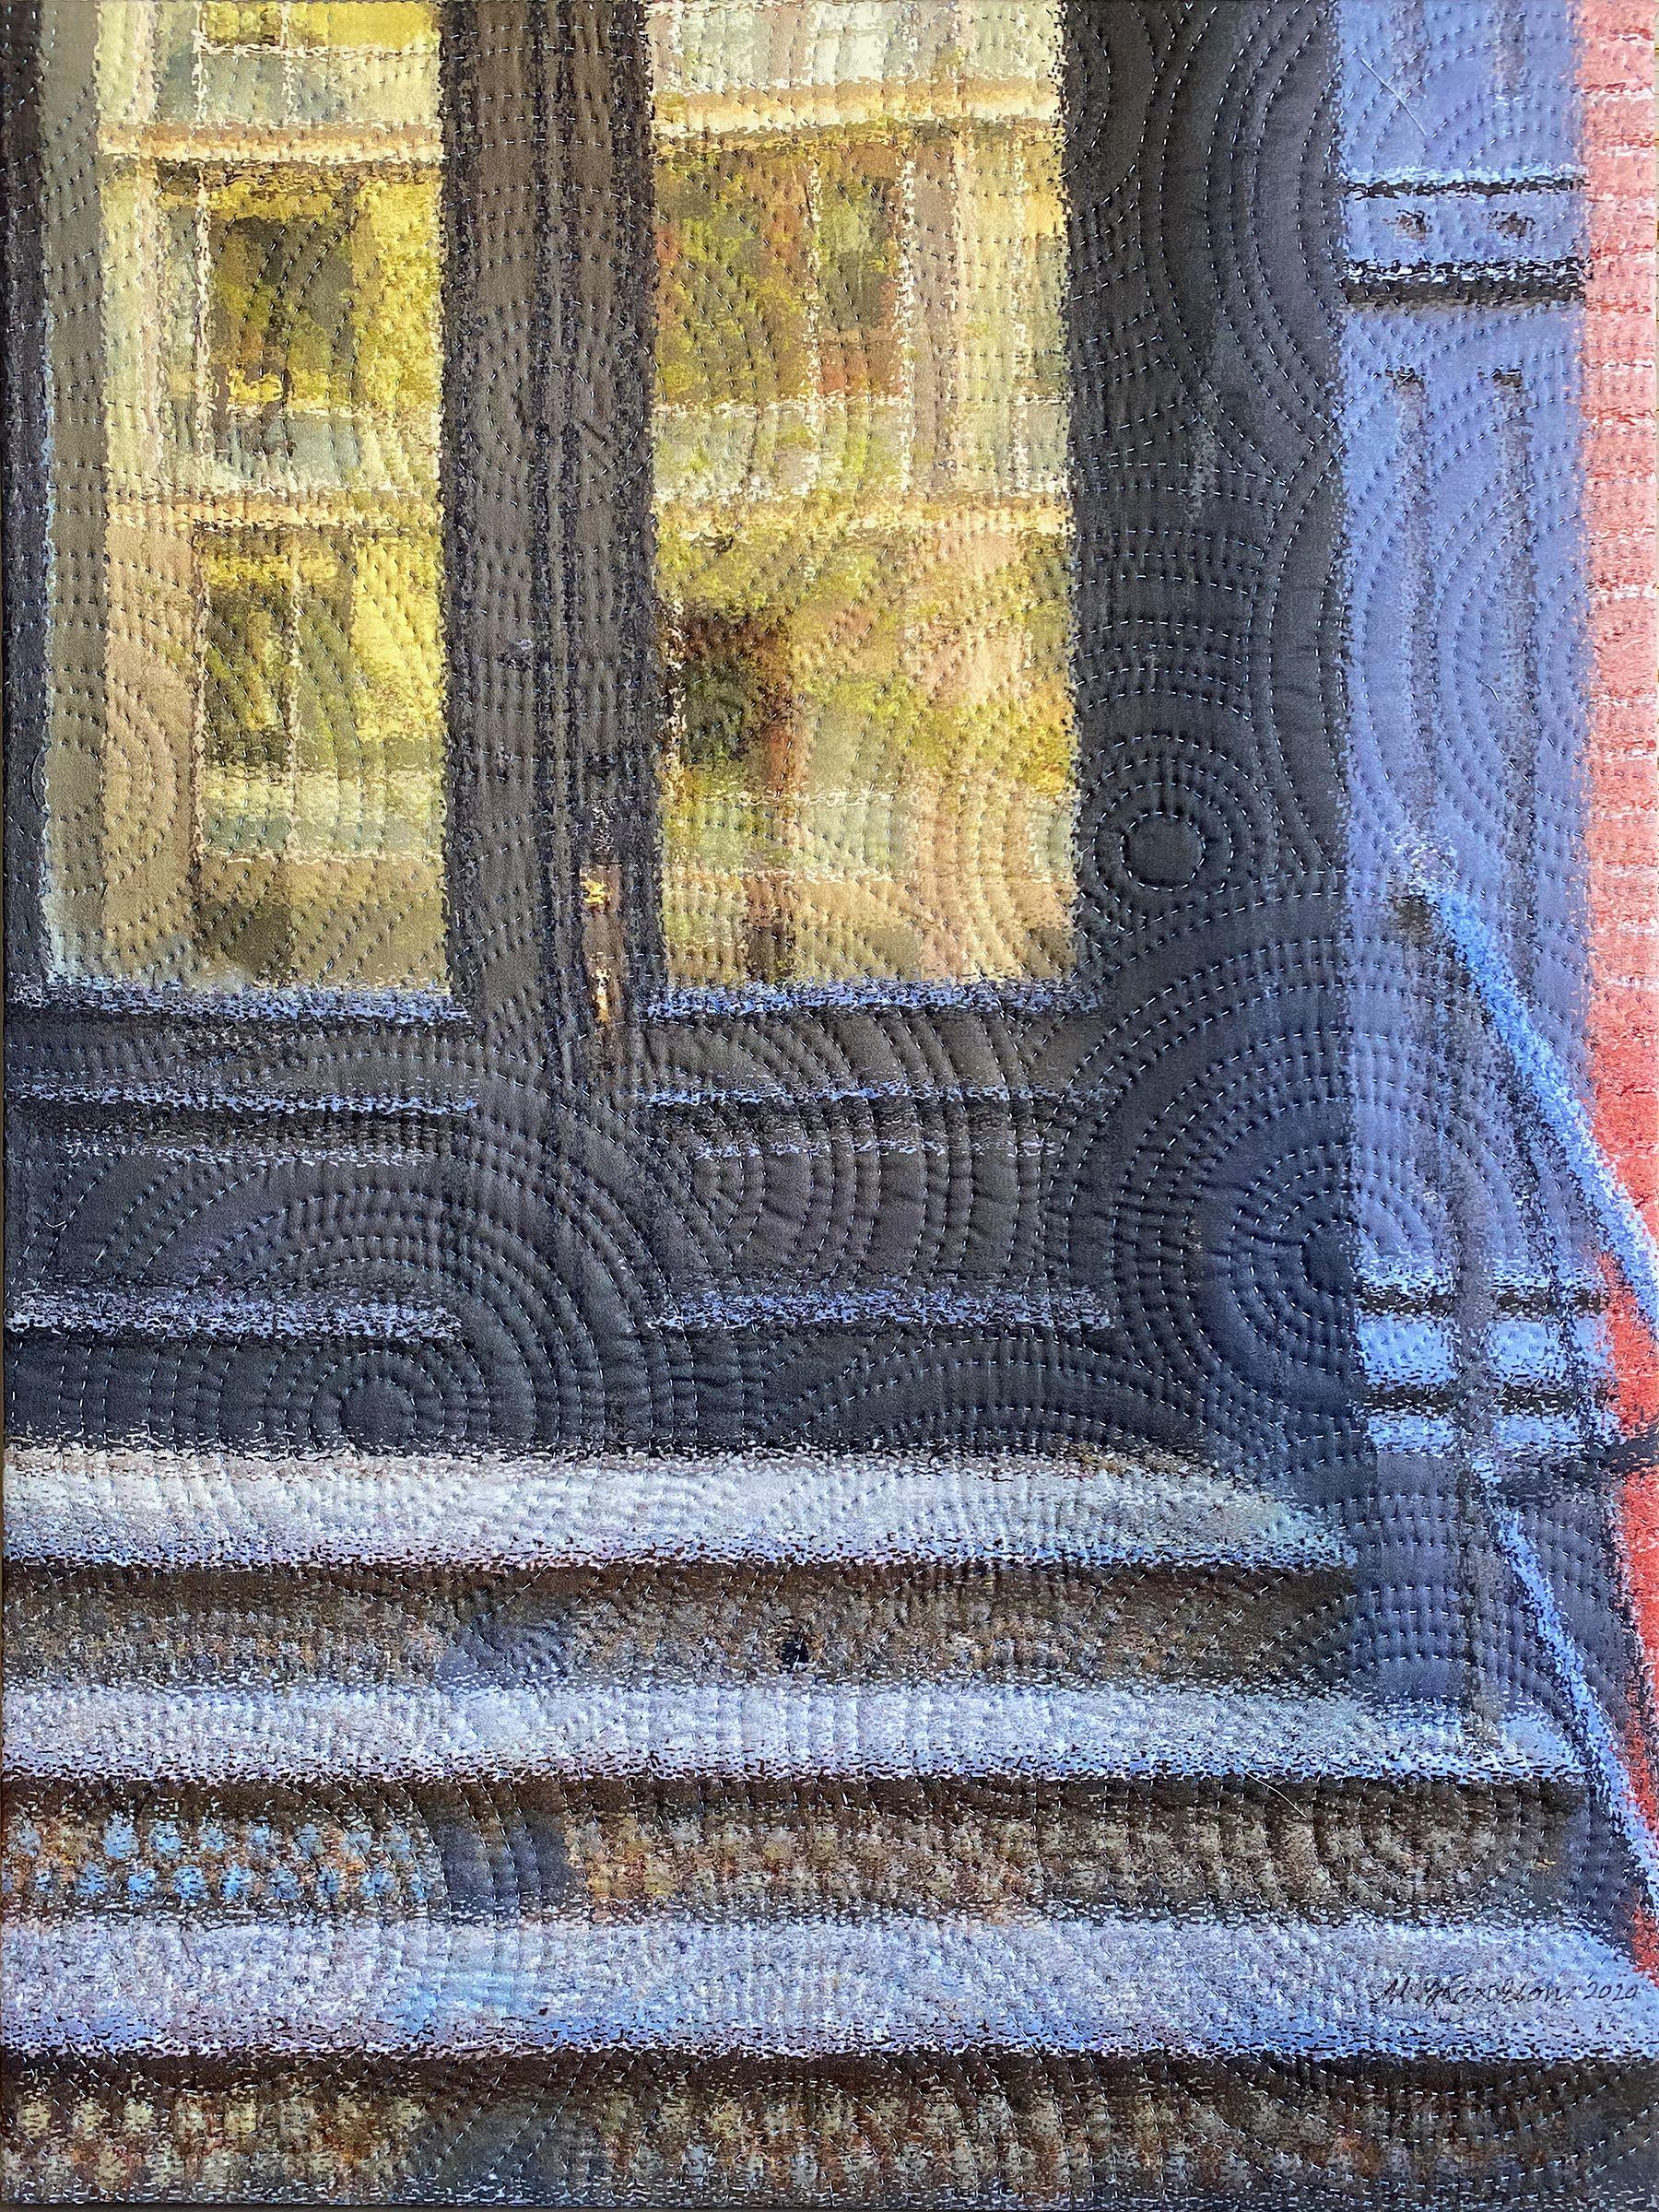 Mannahatta-Wooster Street, Mixed Media on Canvas - Mixed Media Art by Marilyn Henrion